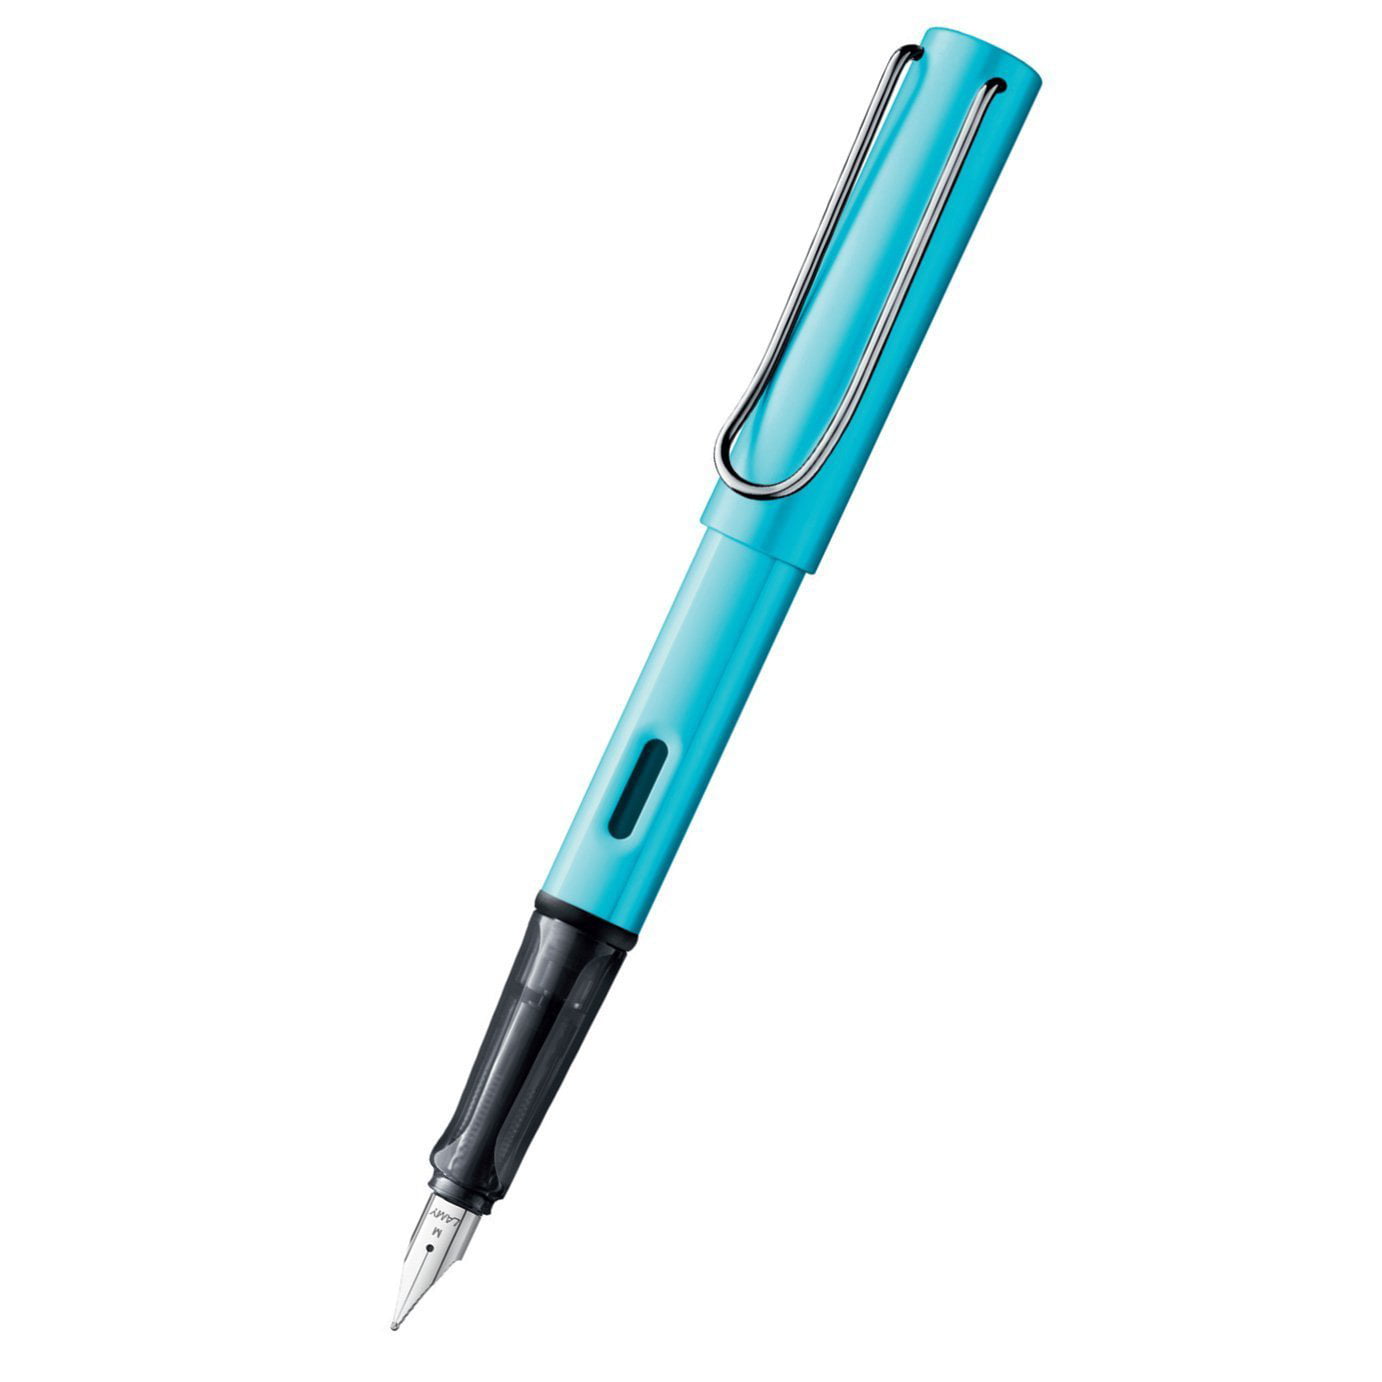 Lamy Al Star Pacific BluePenna Roller Special Edition 2017Rollerball Pen 